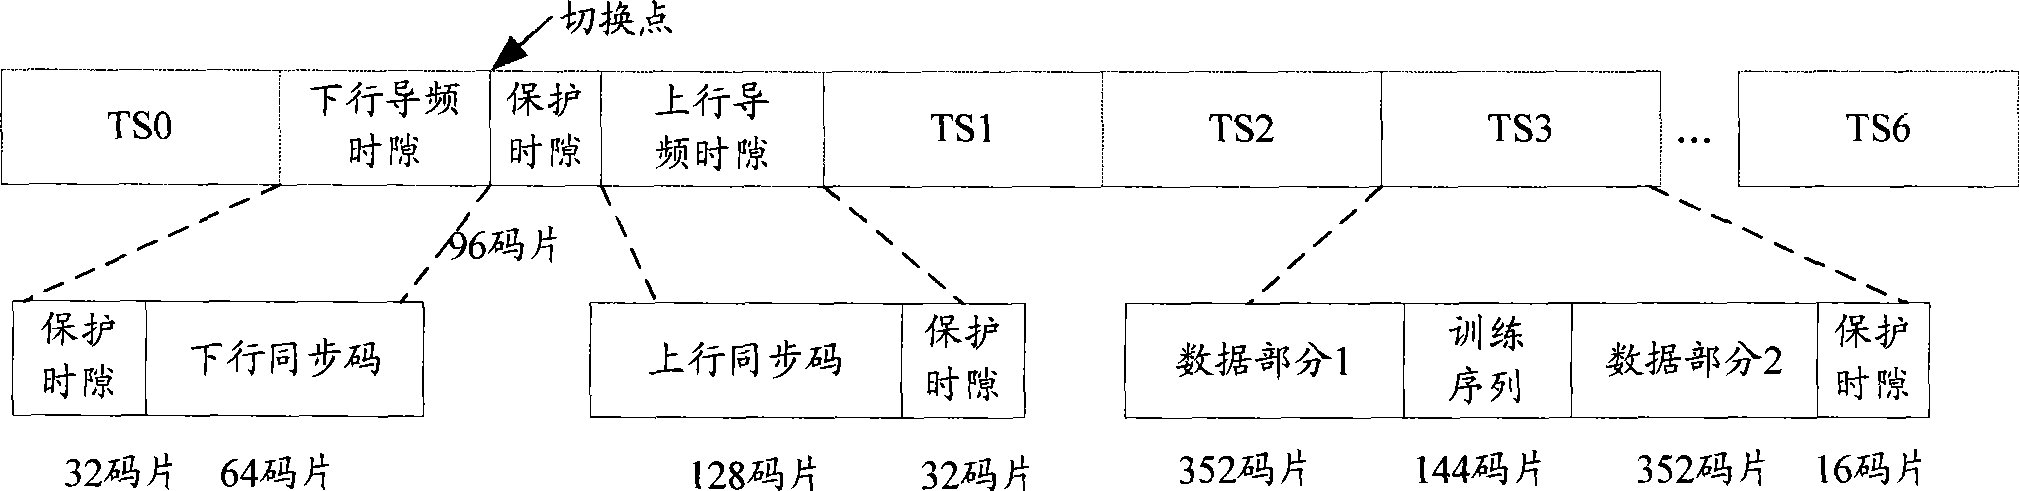 Frame and signal transmitting method of multimedia broadcast and multicast system